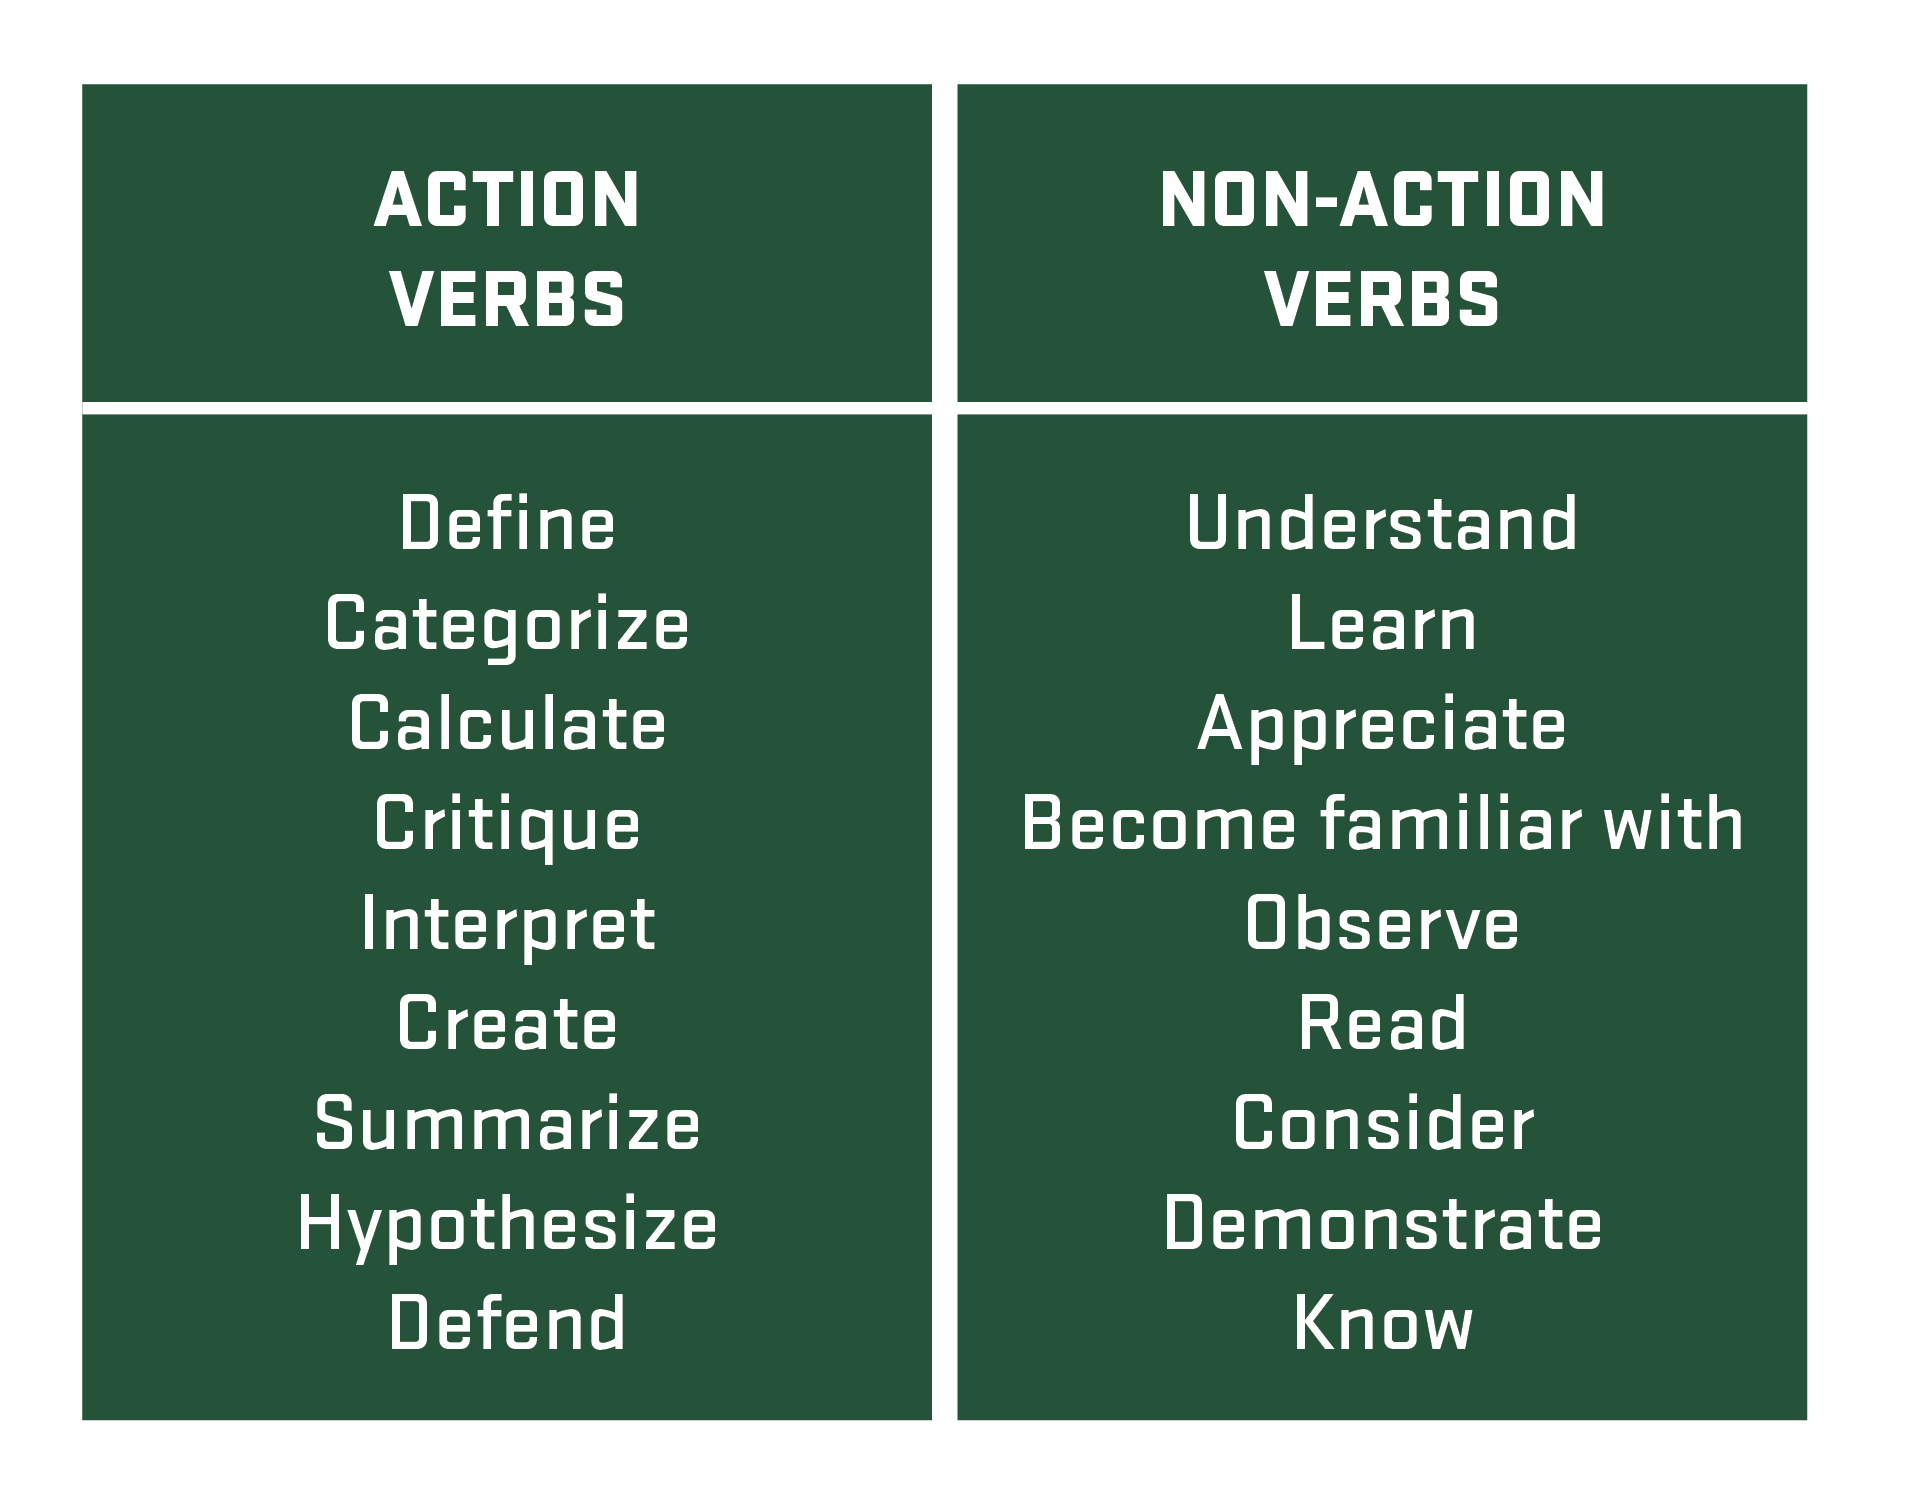 Action Verbs: Define, categorize, calculate, critique, interpret, create, summarize, hypothesize, defend. Non-Action Verbs: Understand, learn, appreciate, become familiar with, observe, read, consider, demonstrate, know.